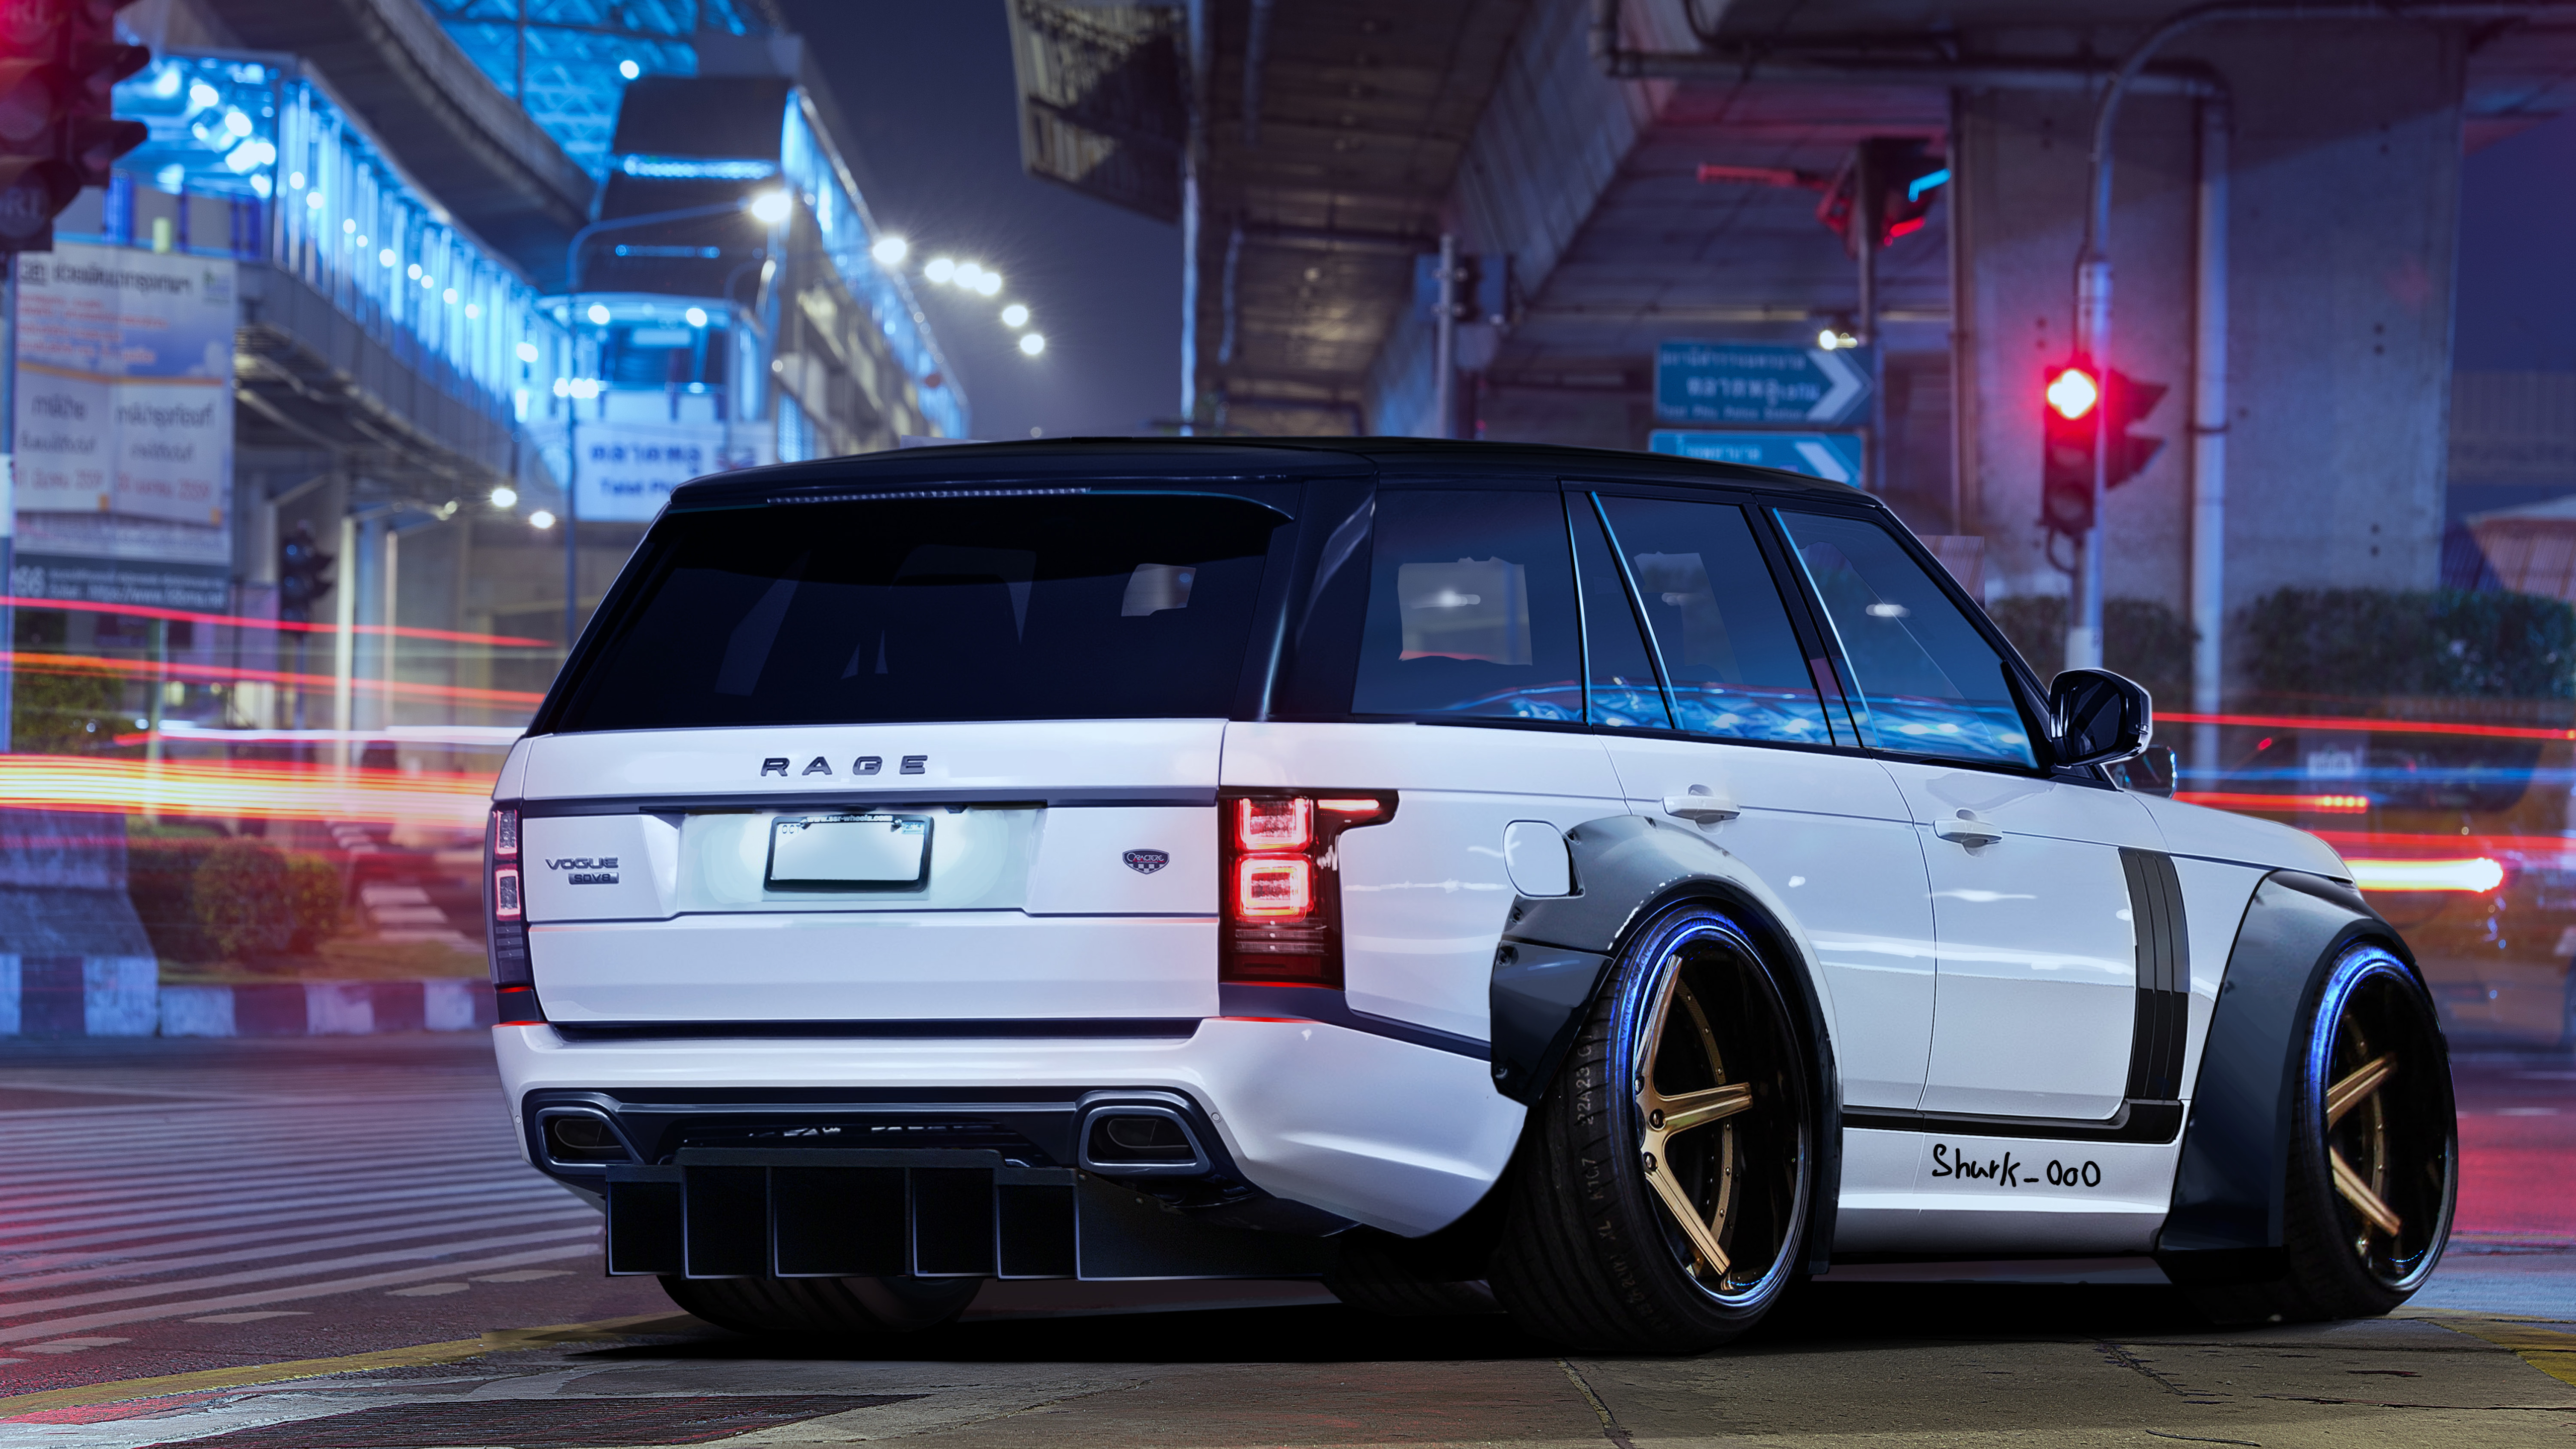 Hd Wallpapers Cars Range Rover